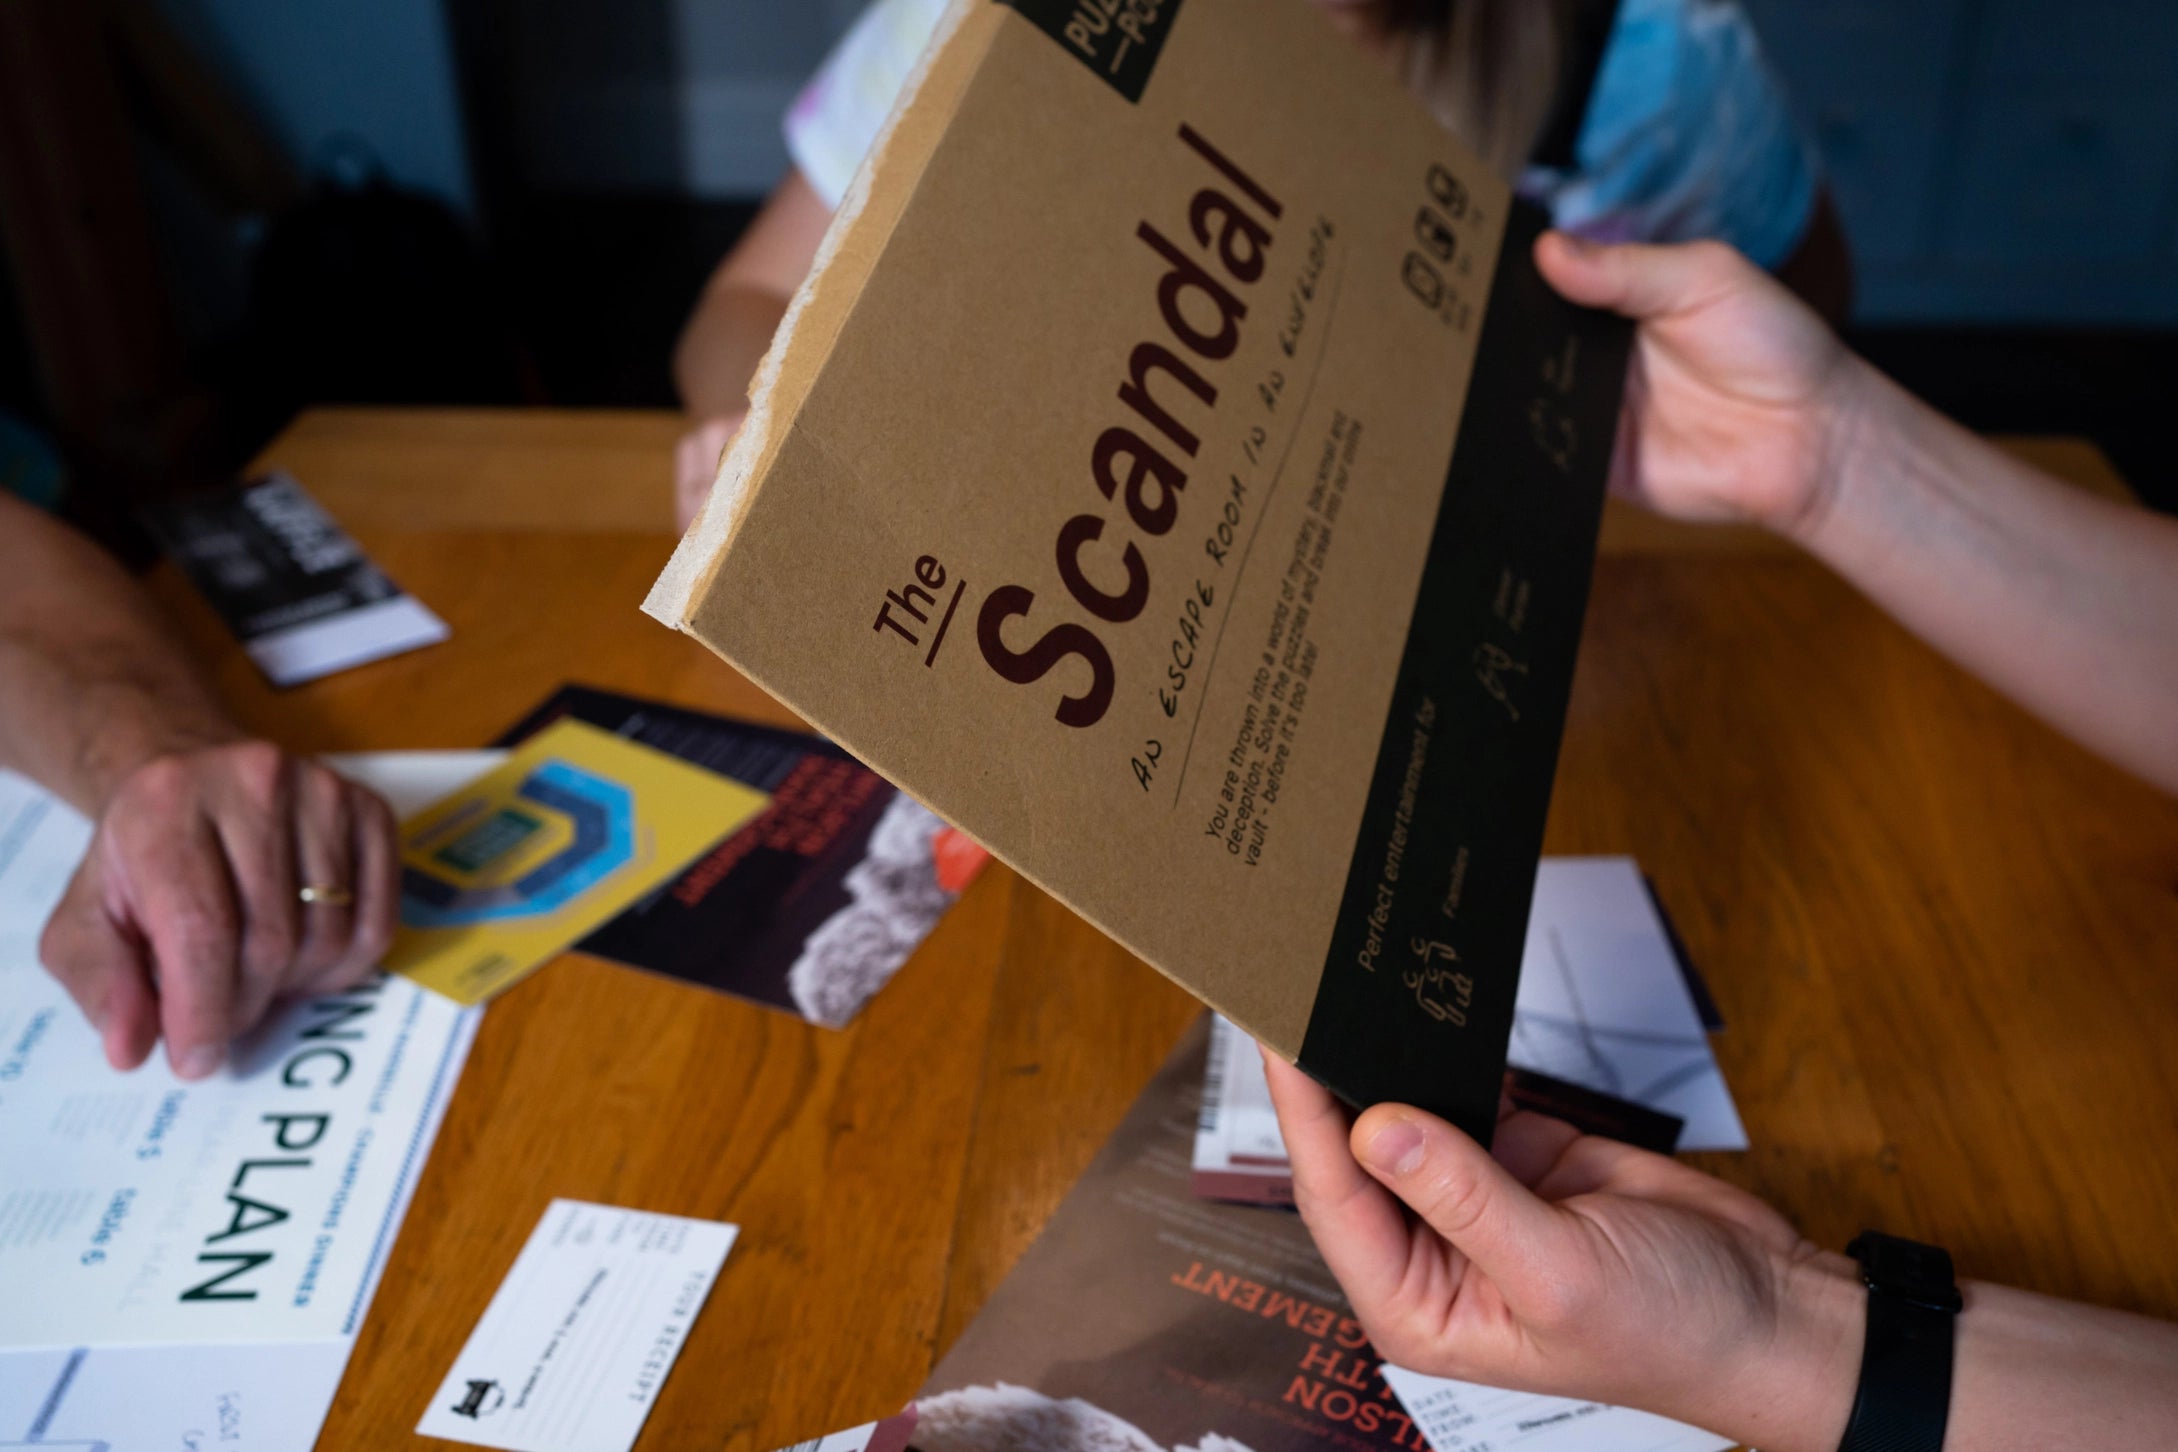 An Escape Room in an Envelope: The Scandal